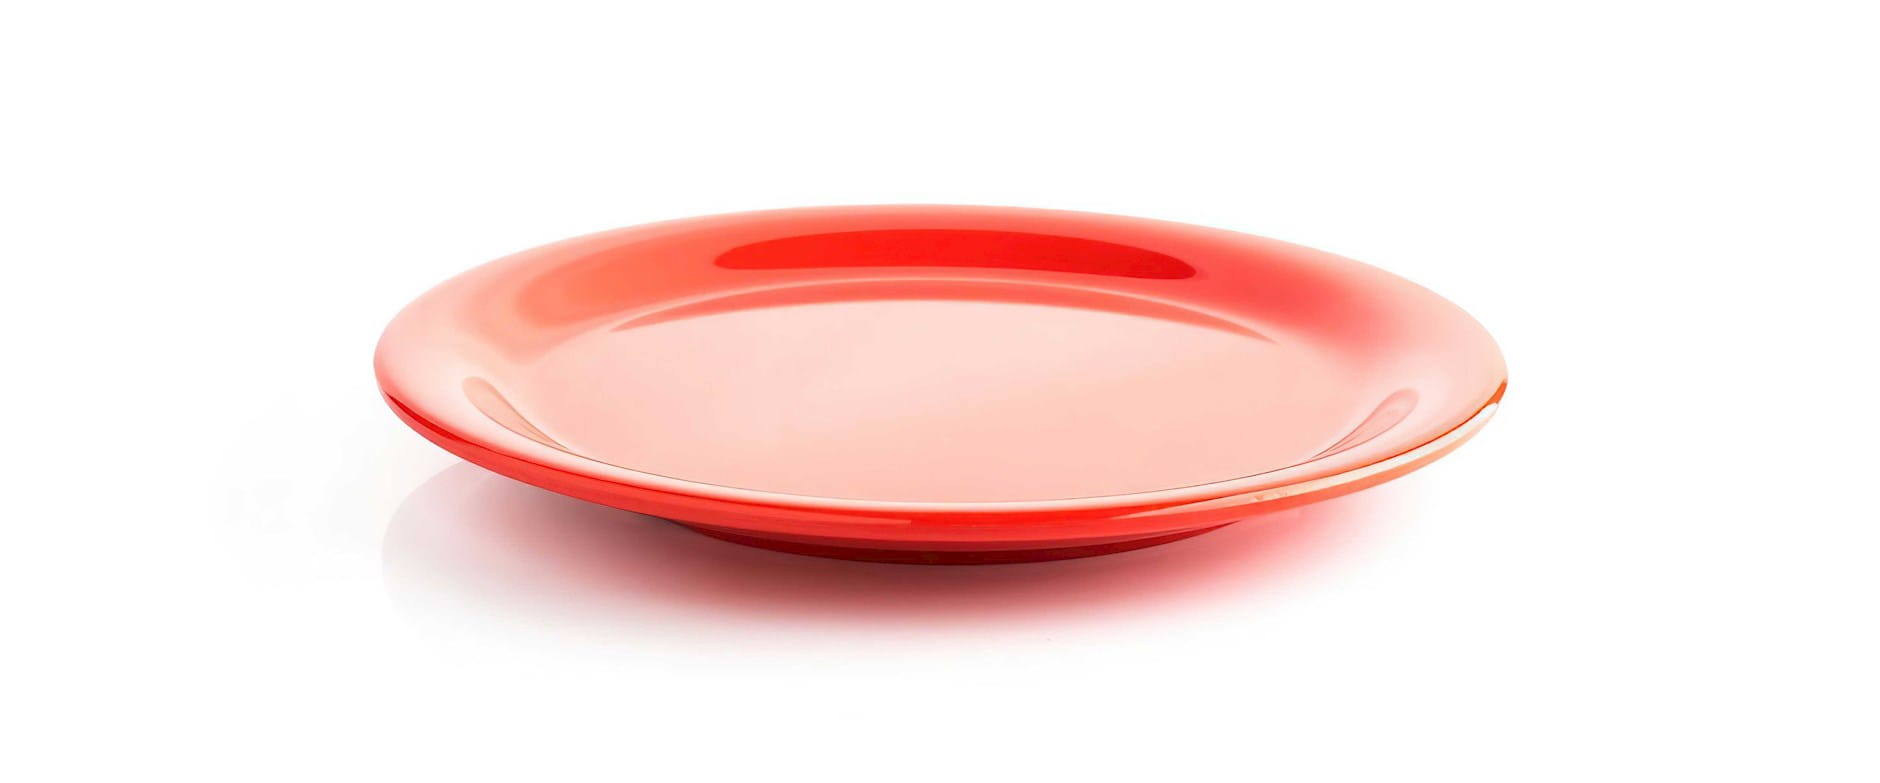 Red plate on a white surface